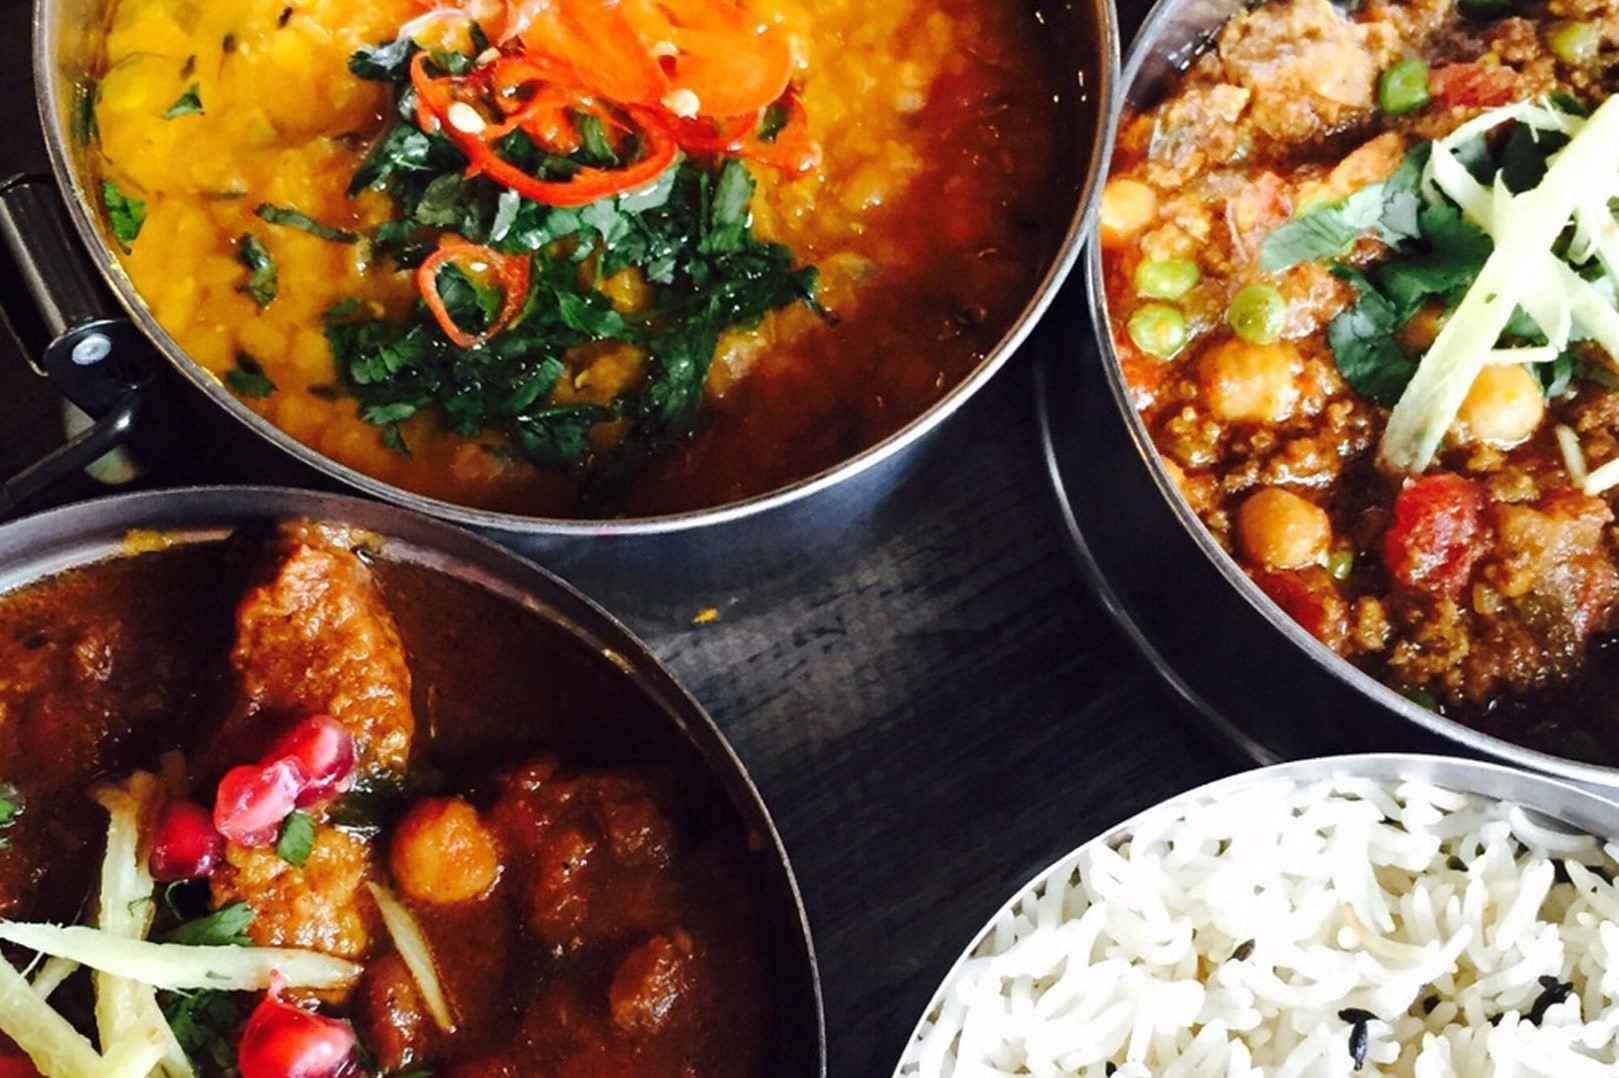 bowls-of-curry-and-rice-at-mowgli-street-food